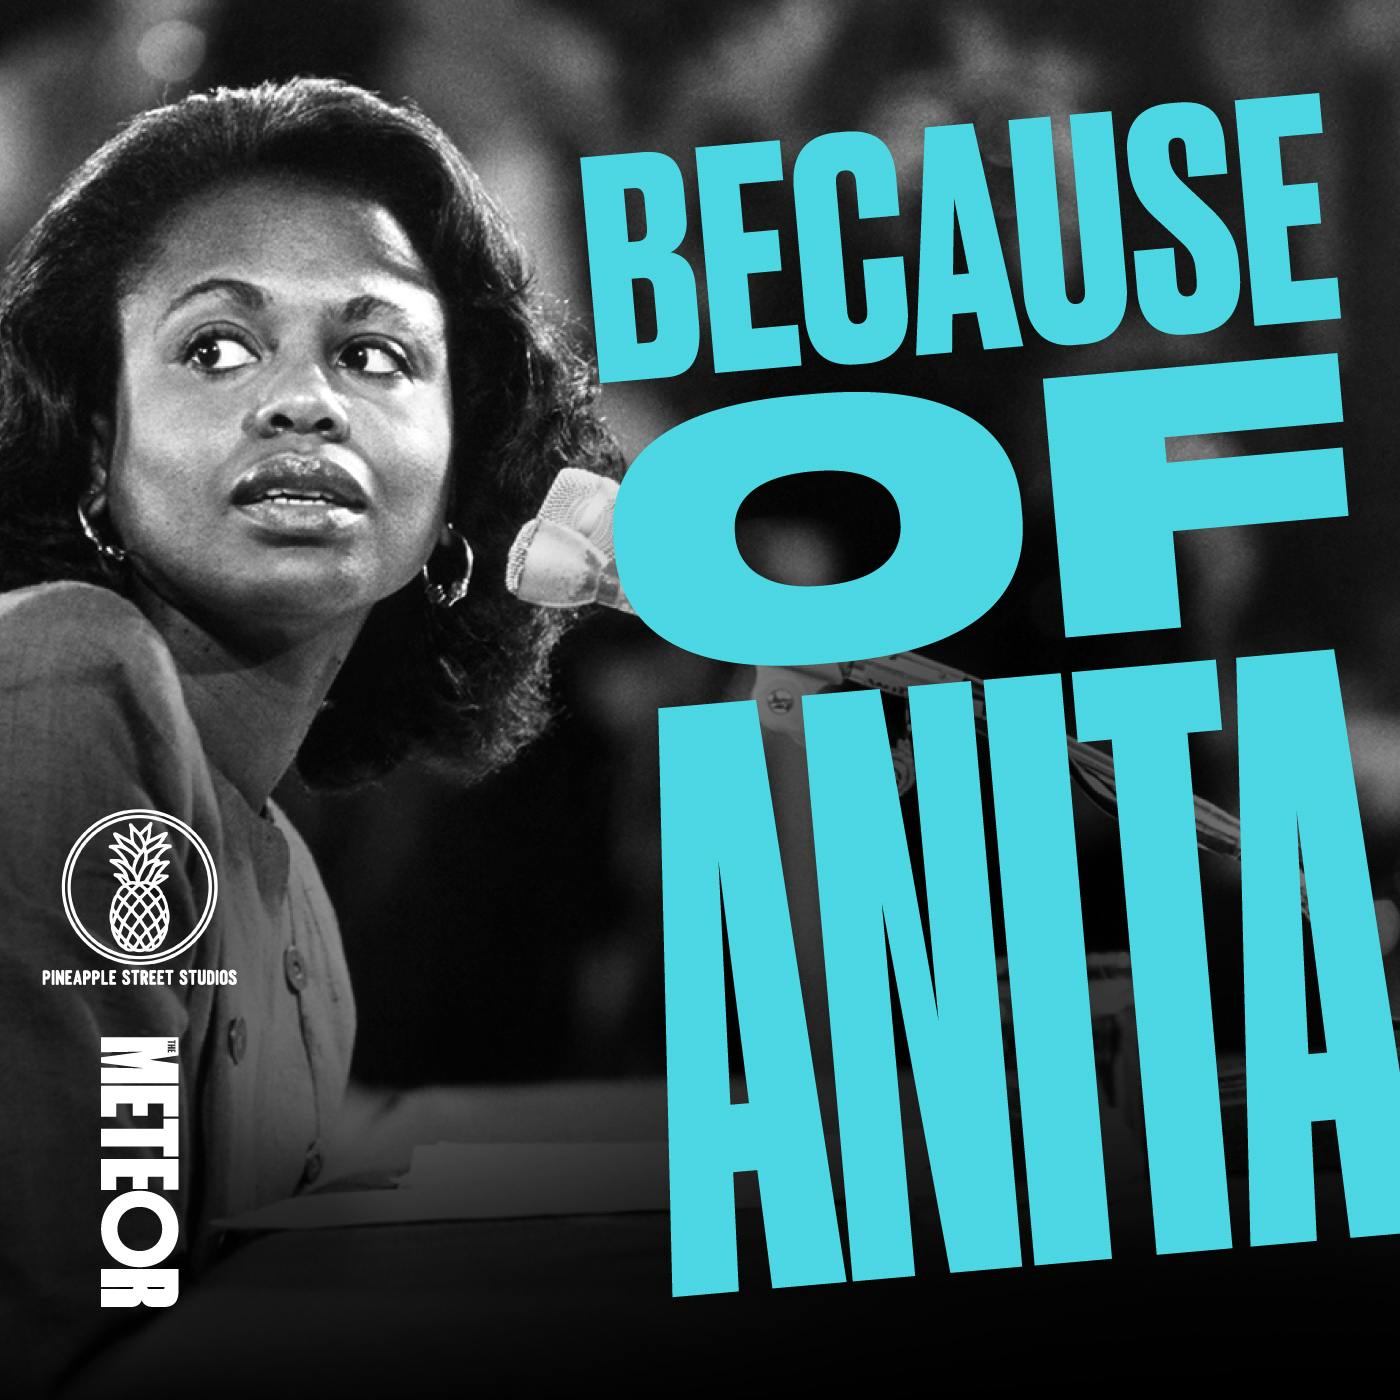 Revisiting 1991 with Anita Hill